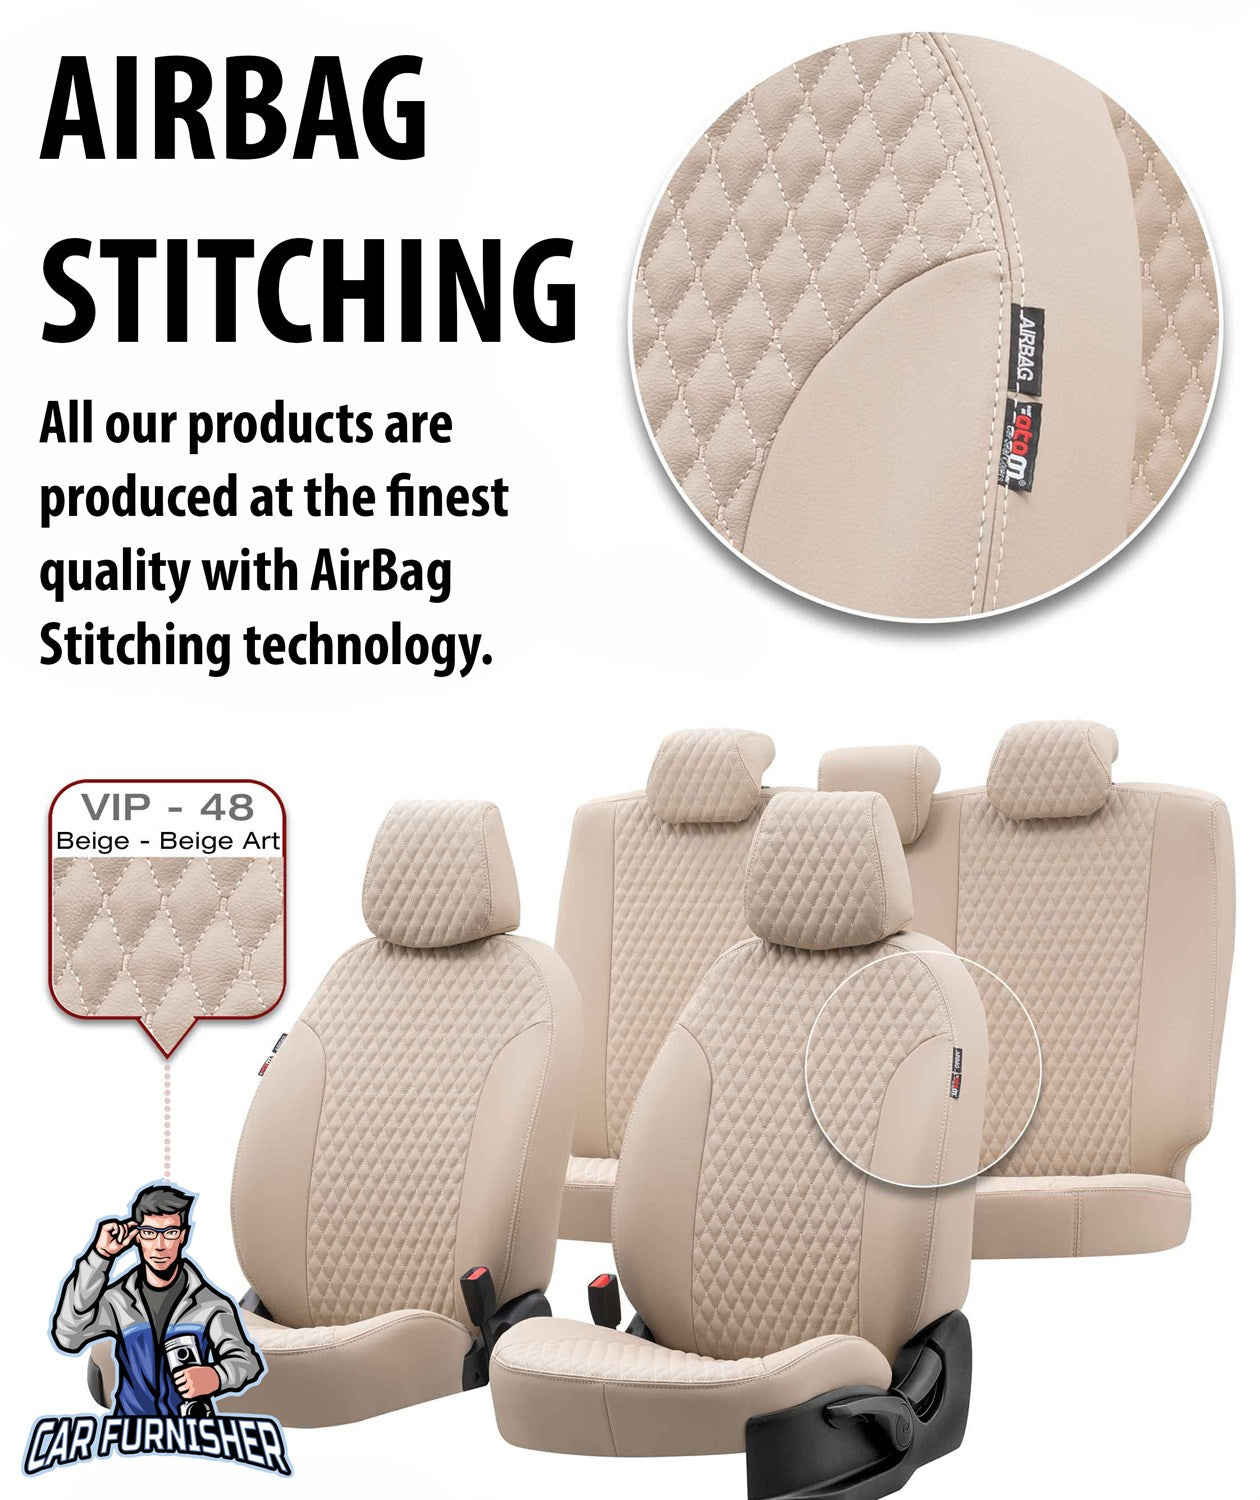 Ford Kuga Seat Covers Amsterdam Leather Design Beige Leather